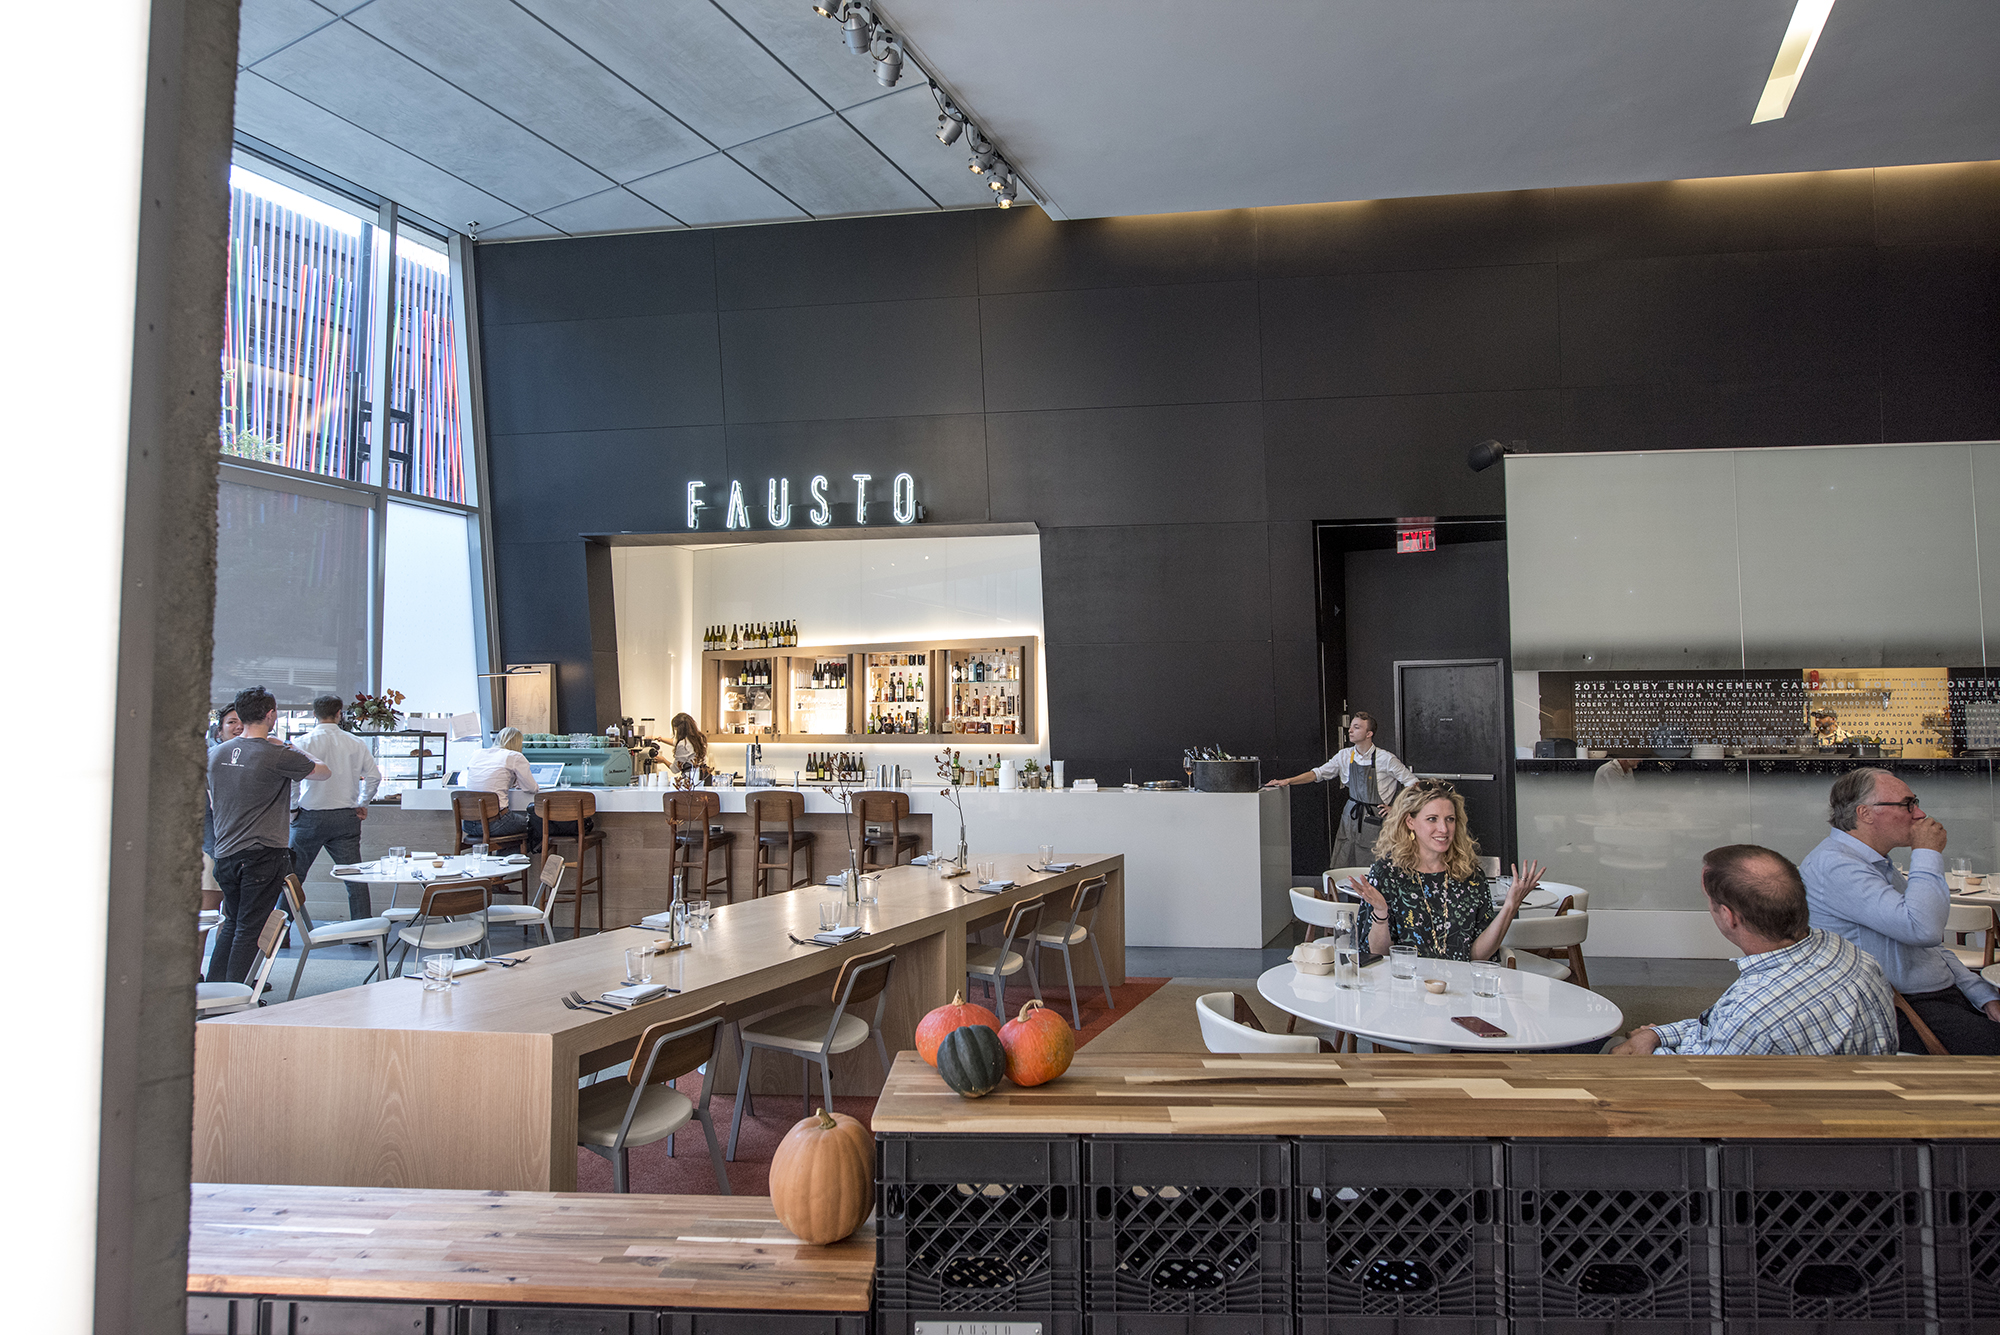   Fausto at the CAC  has a robust lunch menu, perfect for elegant meetings. || Image:  Twin Spire Photography  - Published: 10.2.2019 